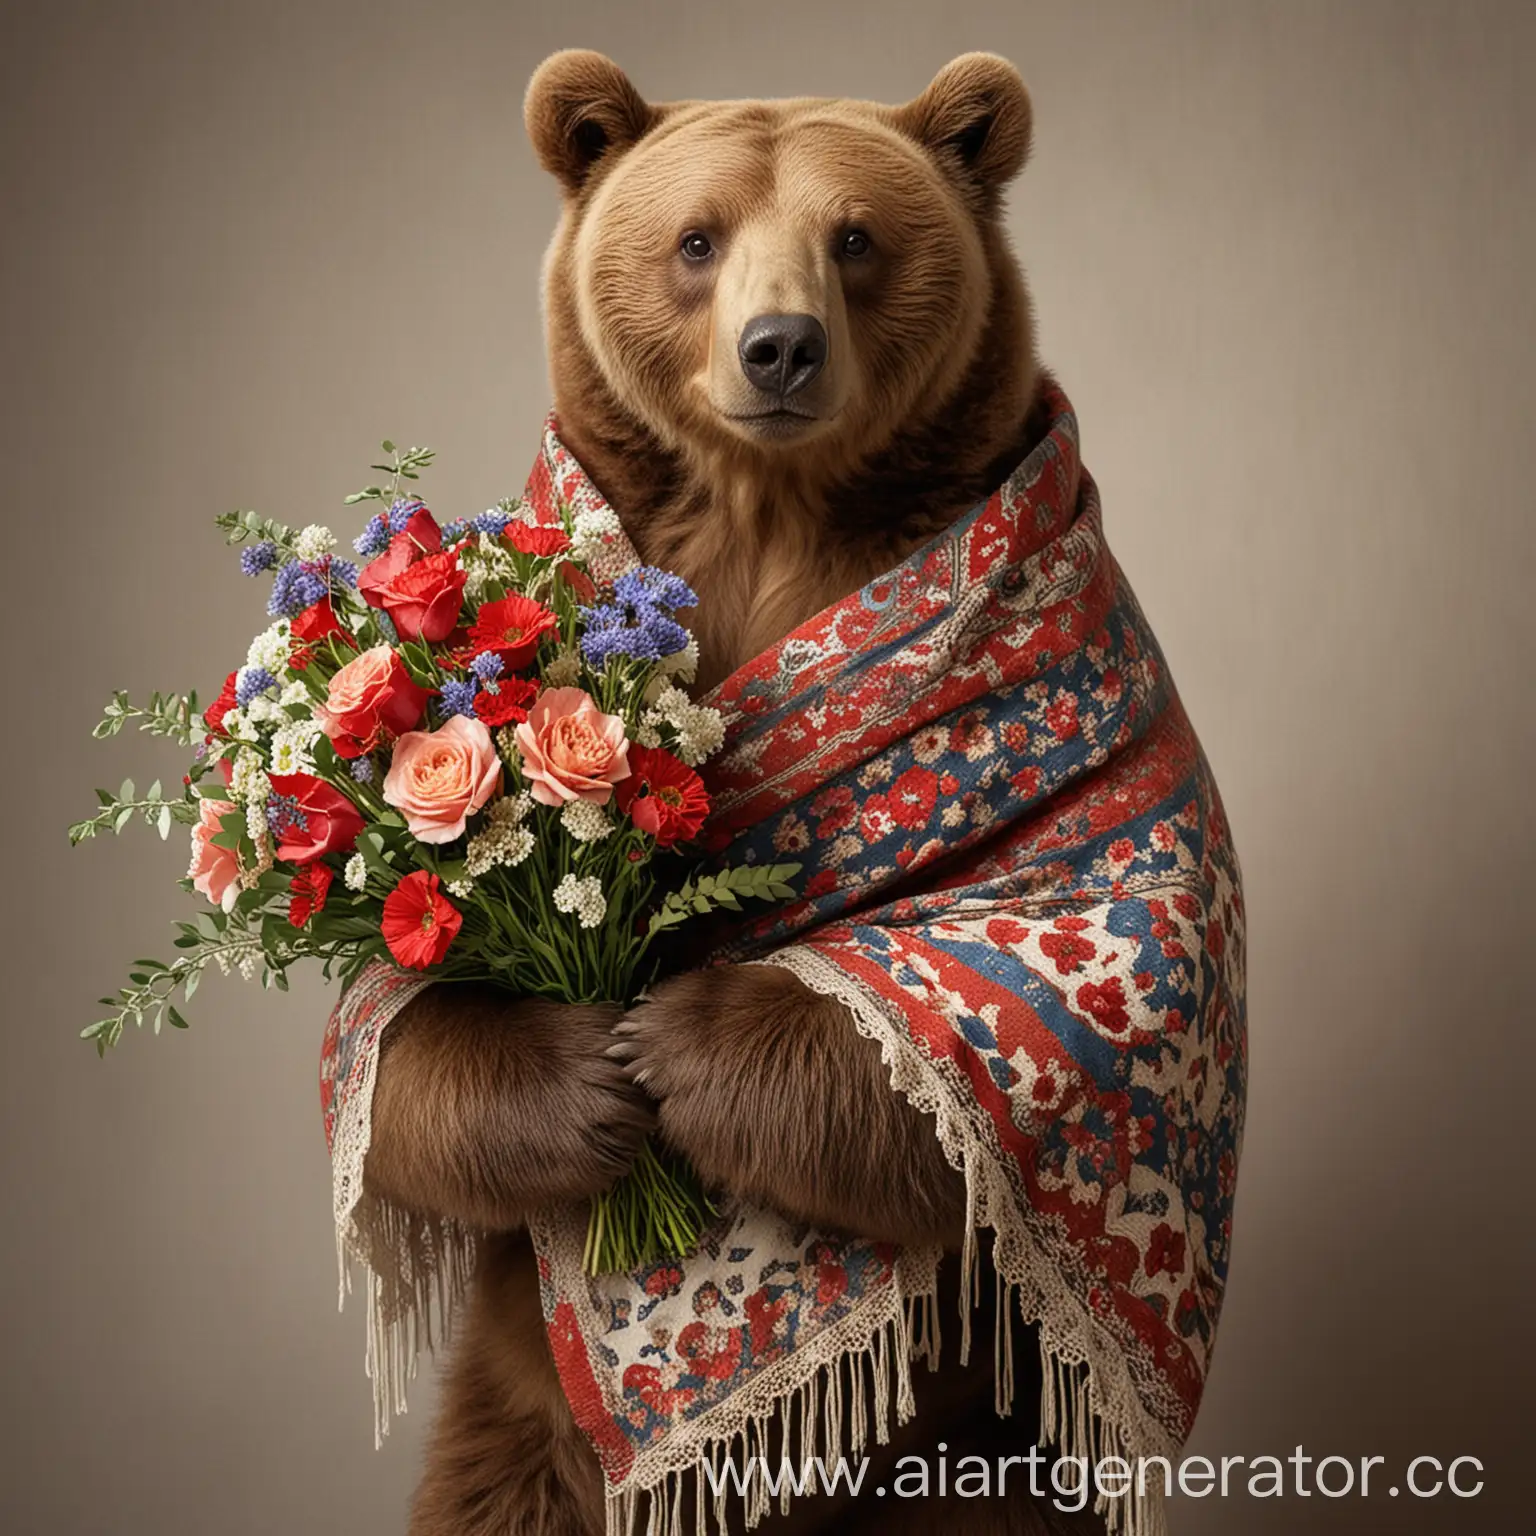 Russian-Brown-Bear-Holding-Bouquet-of-Flowers